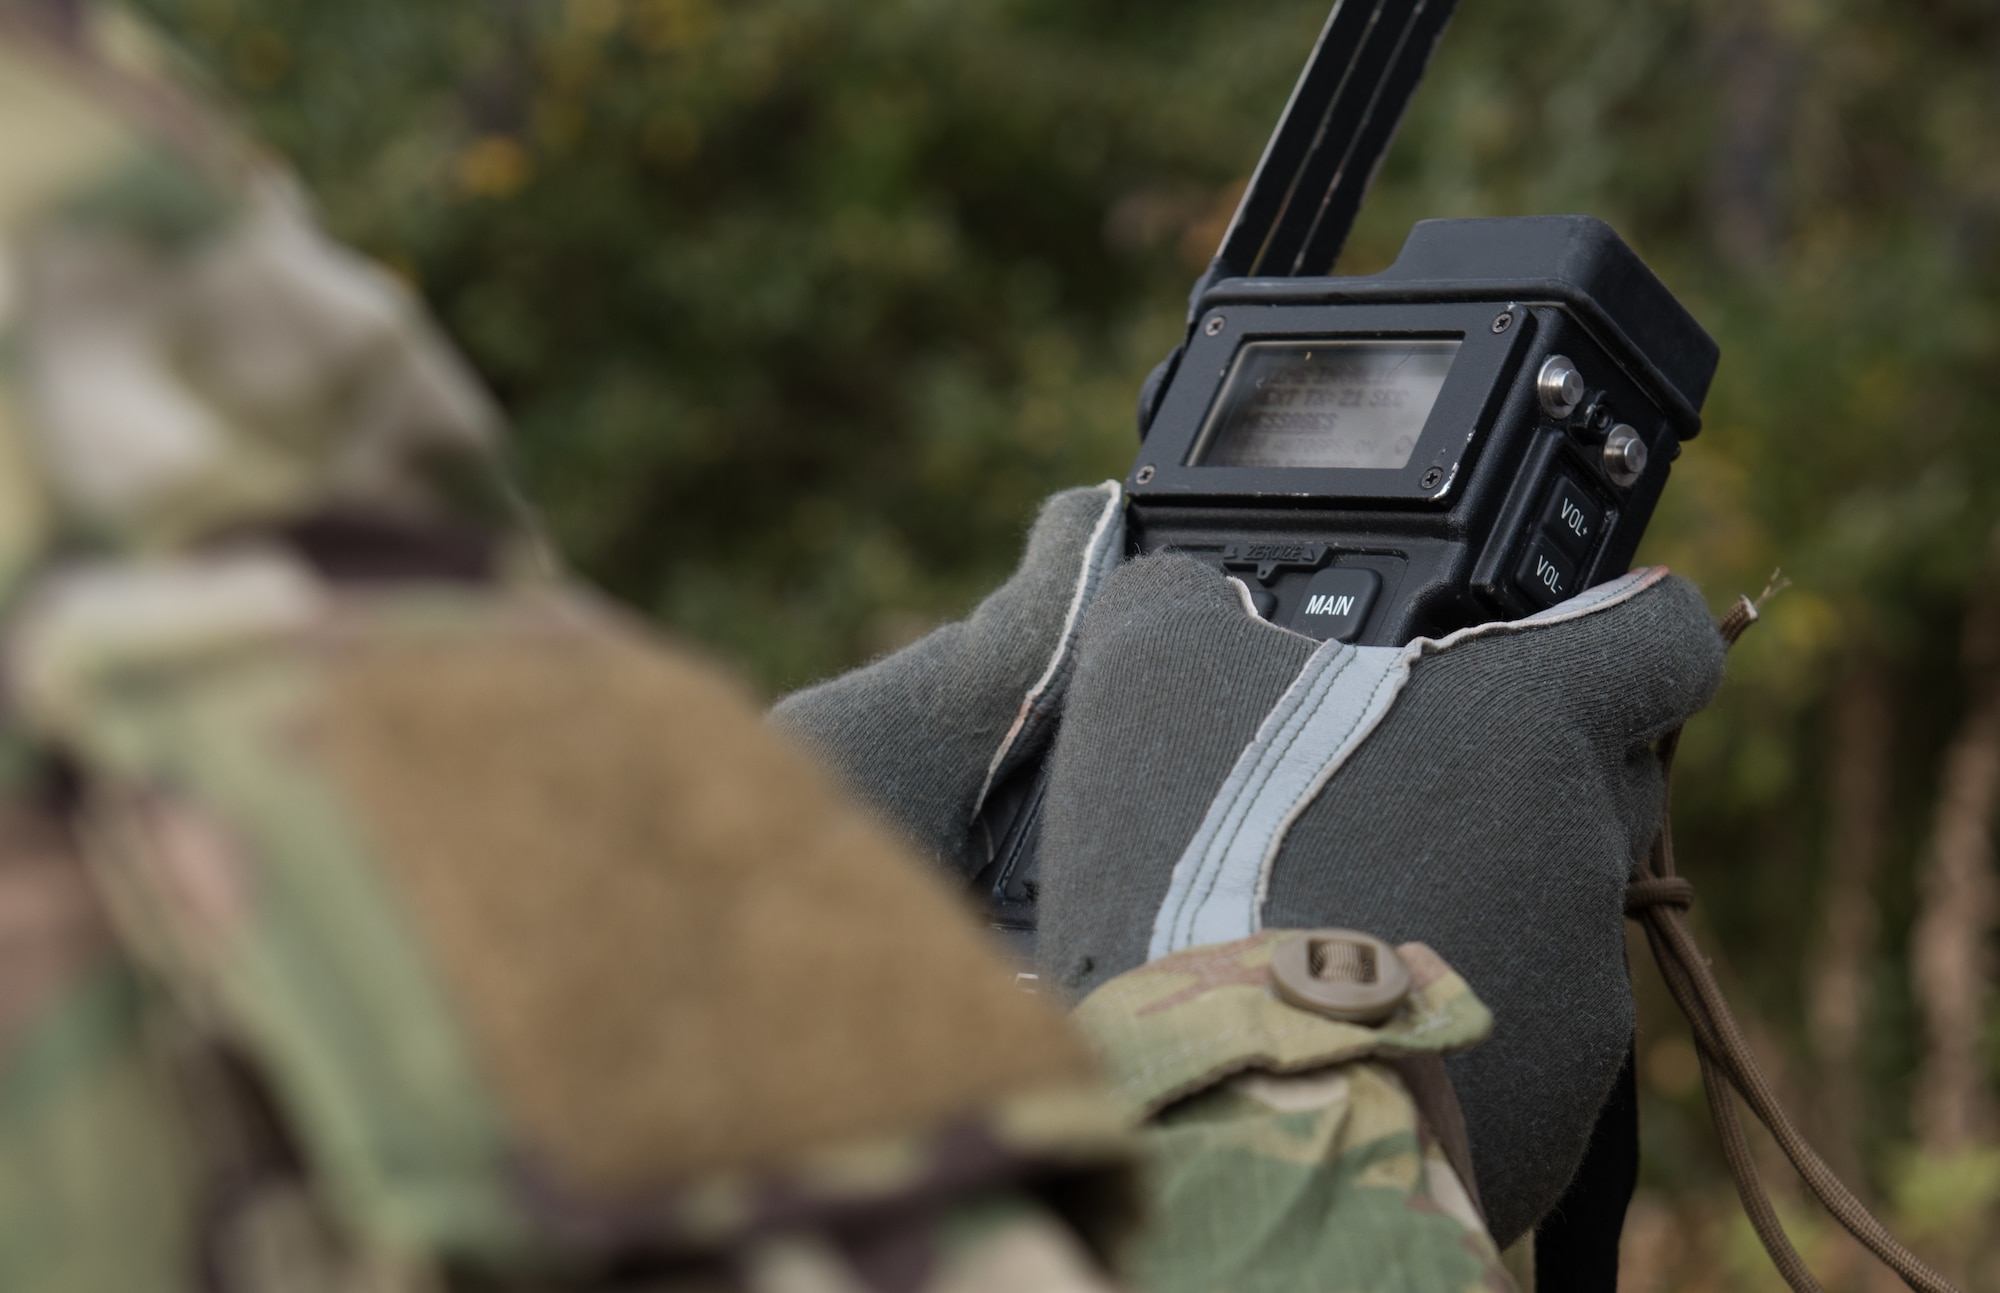 U.S. Air Force Tech. Sgt. Stephen Drakes, 192 Operations Support Squadron, Virginia Air National Guard SERE Survival, Evasion, Resistance and Escape non-commissioned officer in charge, sets a survival radio during a training at Joint Base Langley-Eustis, Virginia, Dec. 12, 2019. Drakes led the training which taught survival skills necessary for an isolation situation. (U.S. Air Force photo by Airman 1st Class Sarah Dowe)